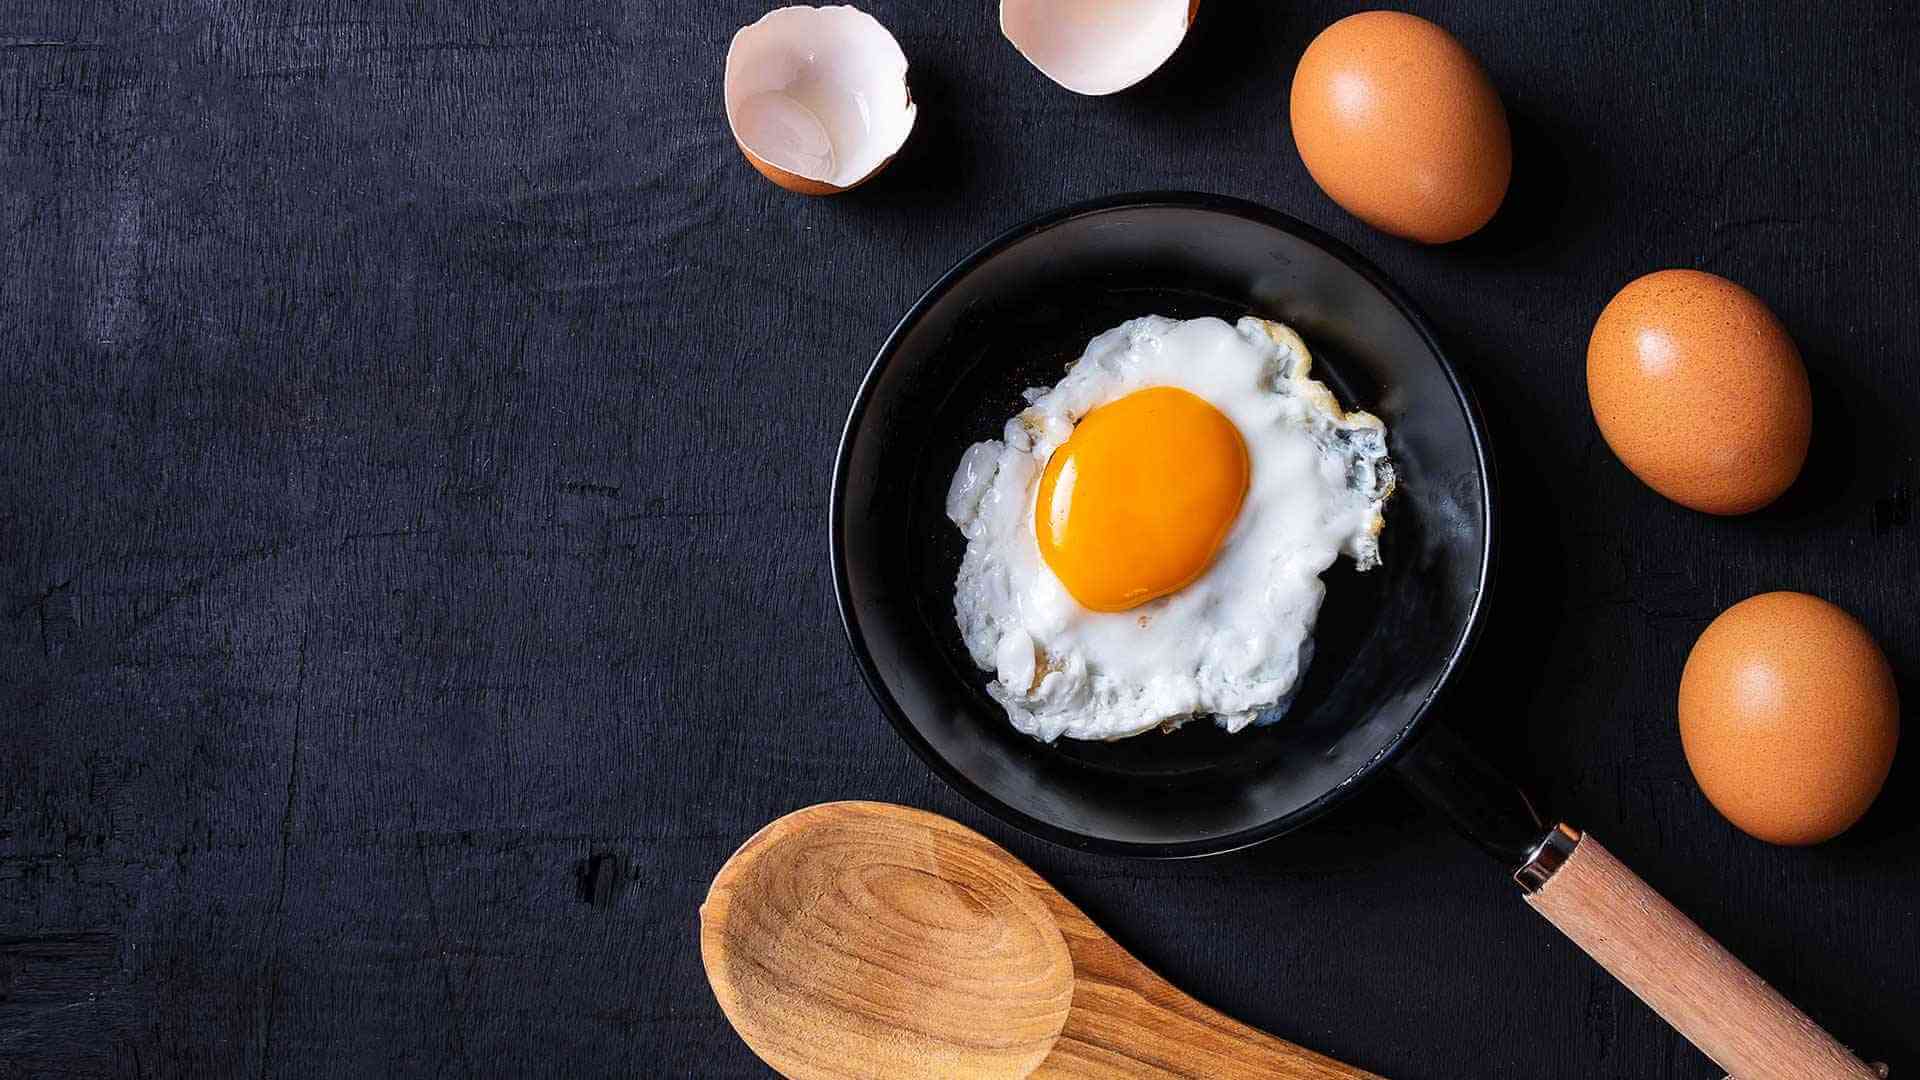 Sunny side up egg on a pan that's surrounded by cracked and uncracked brown eggs and a wooden spatula.